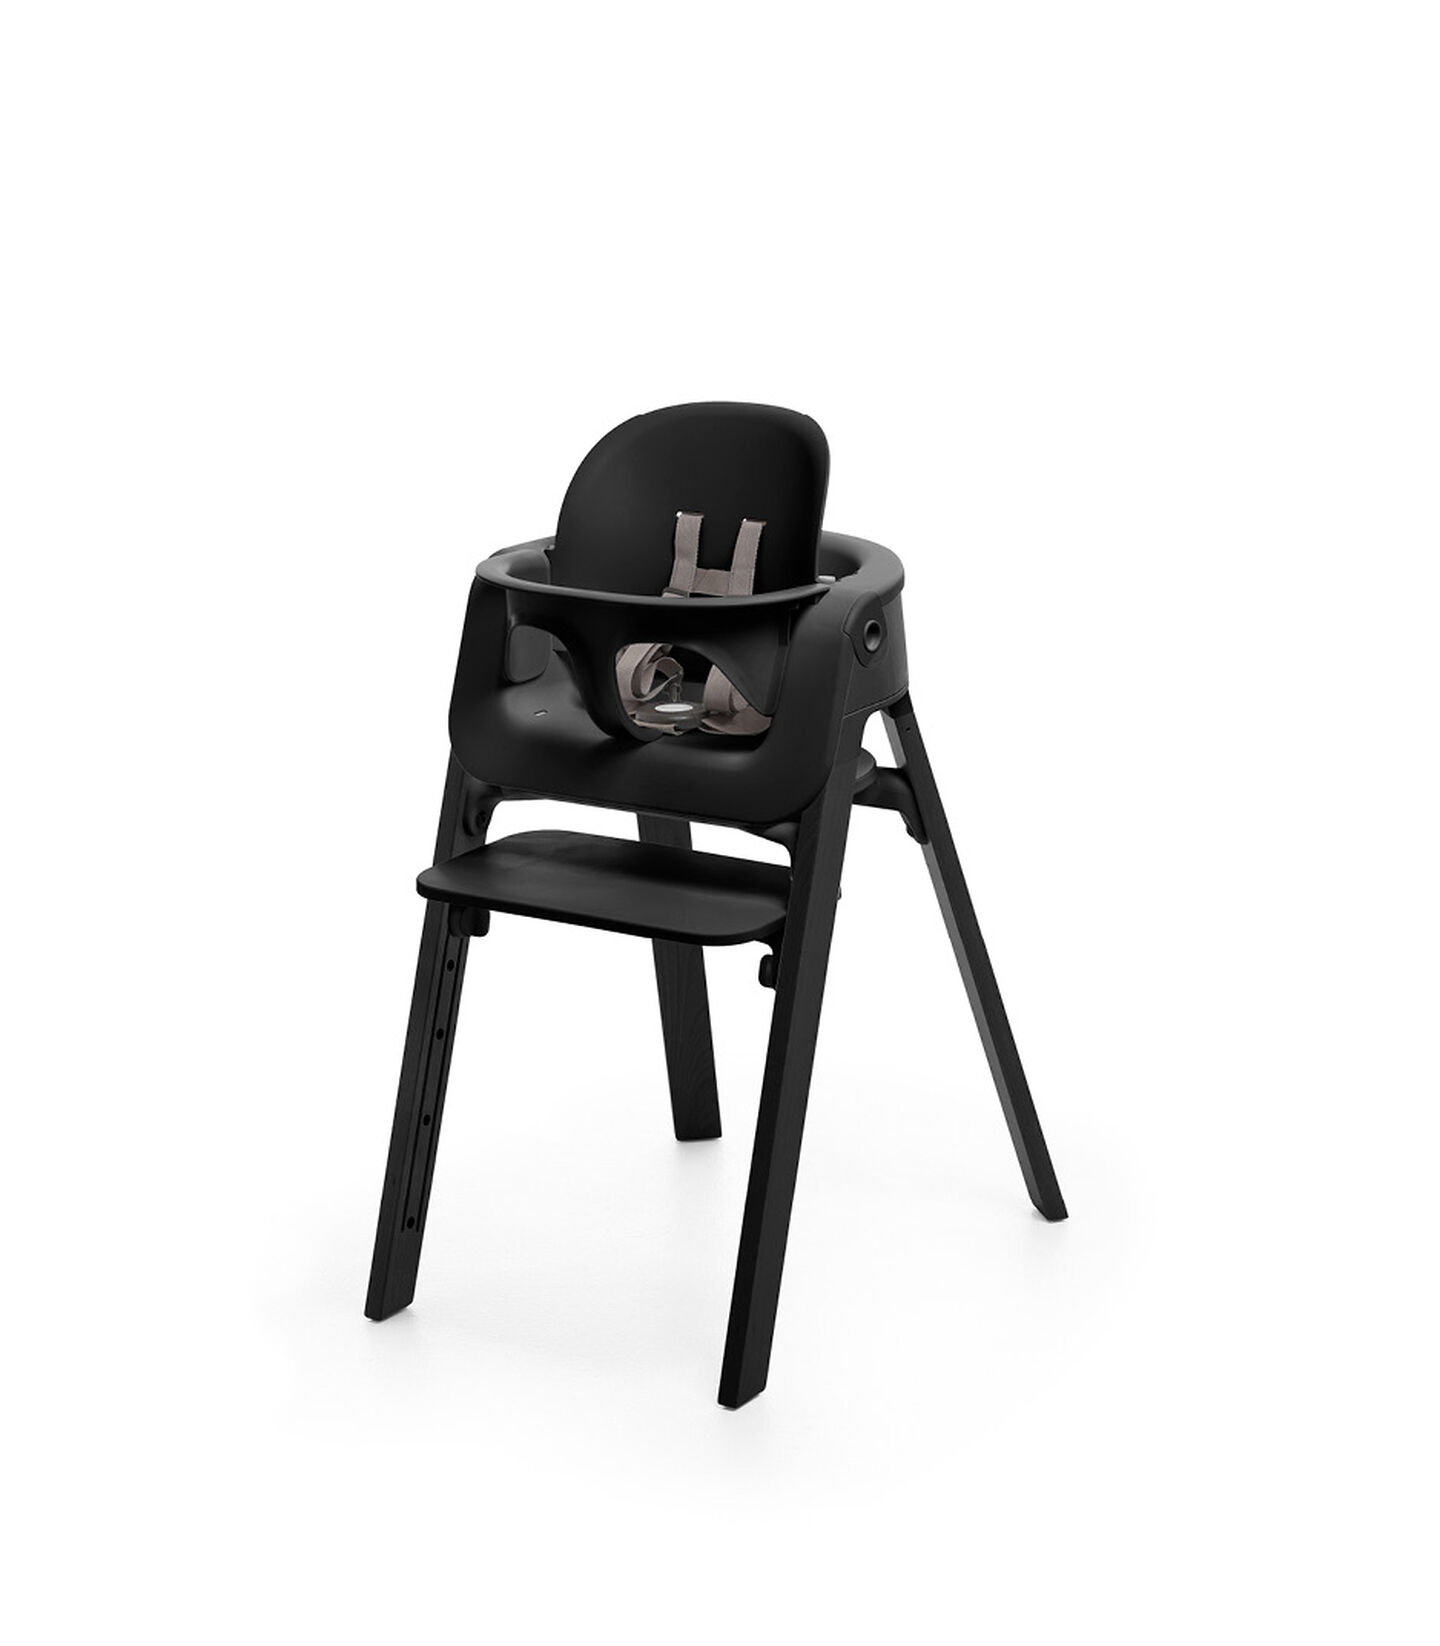 Stokke® Steps™ Beech Black with Baby Set, Black. view 3